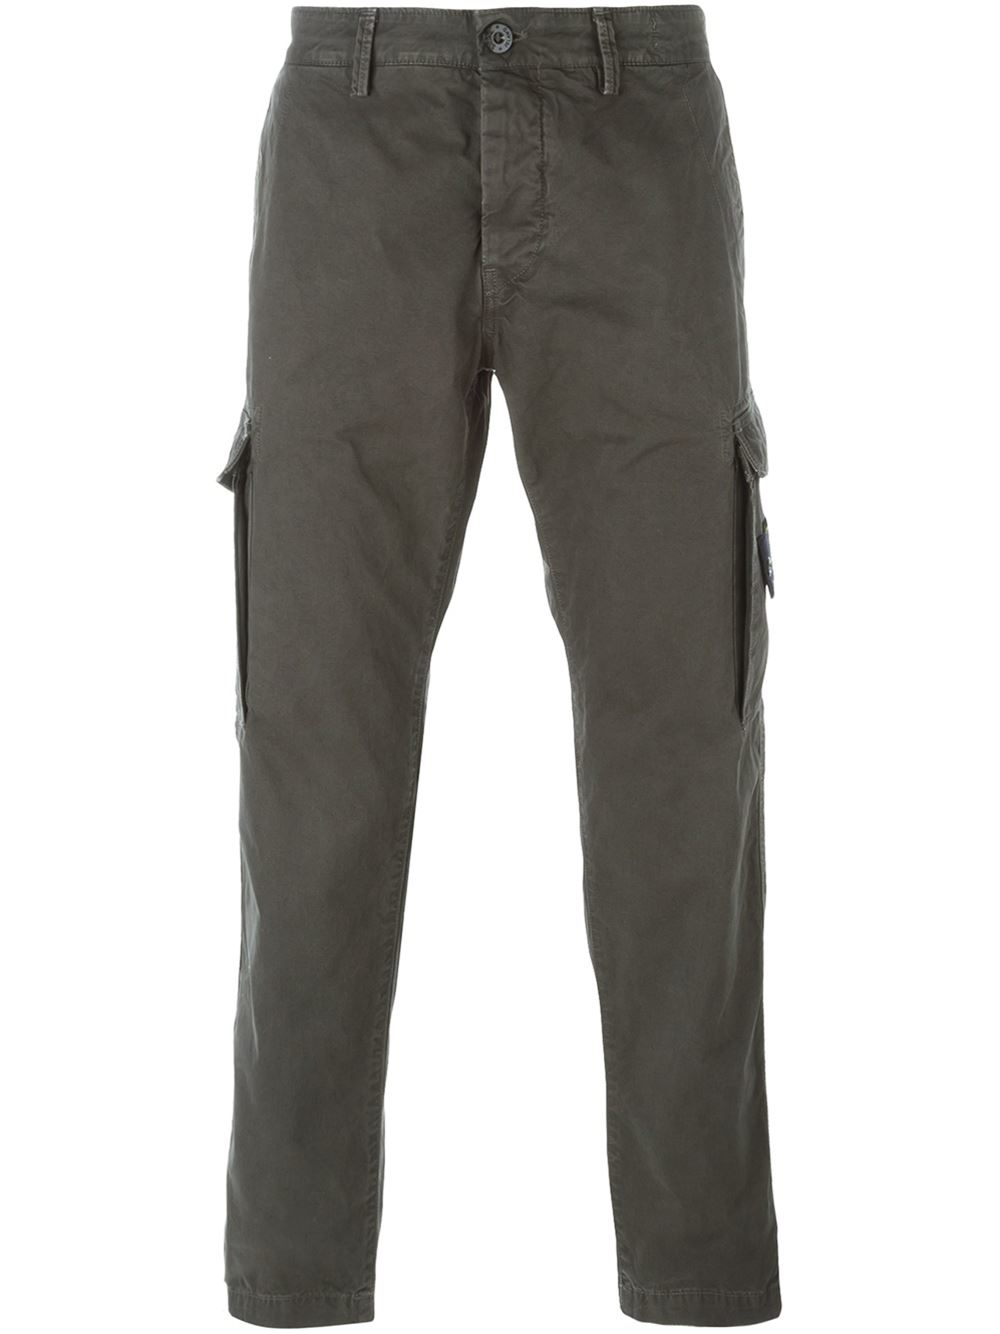 Lyst - Stone Island Slim Cargo Trousers in Gray for Men